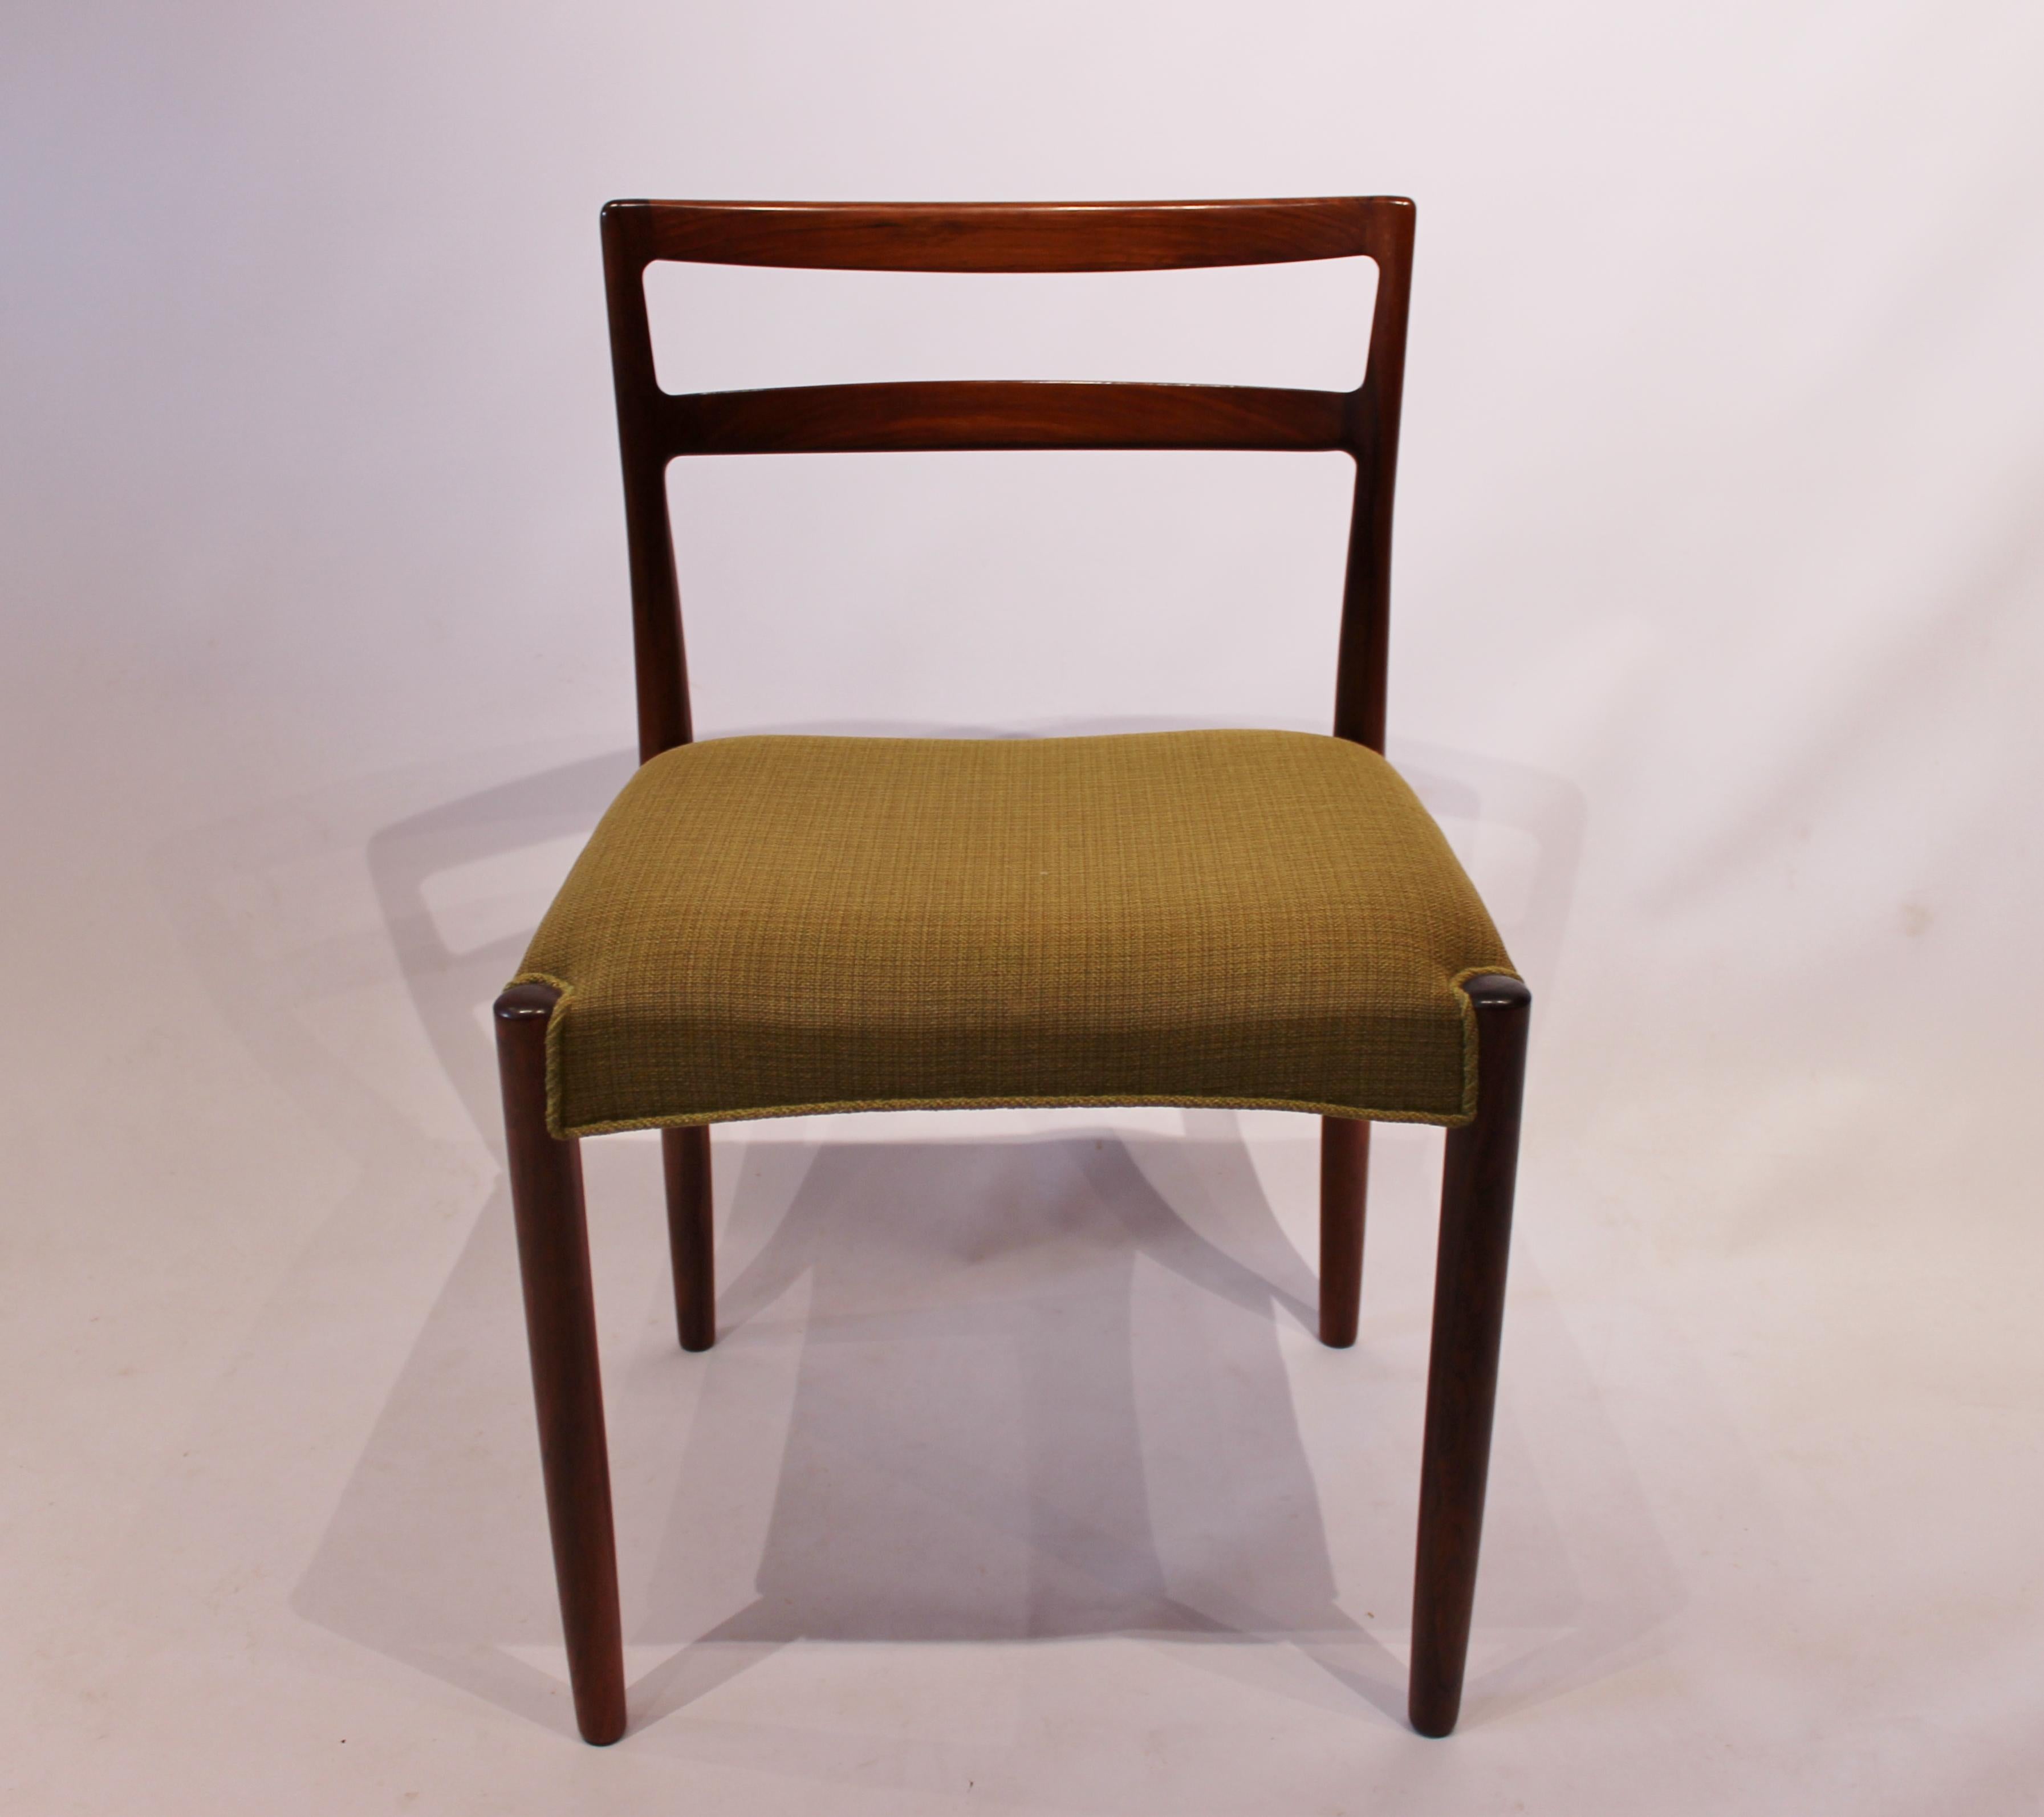 A set of dining room chairs of rosewood and upholstered with green fabric, of Danish design by Knud Færch from the 1960s. The chairs are in great vintage condition and numbered 6264.